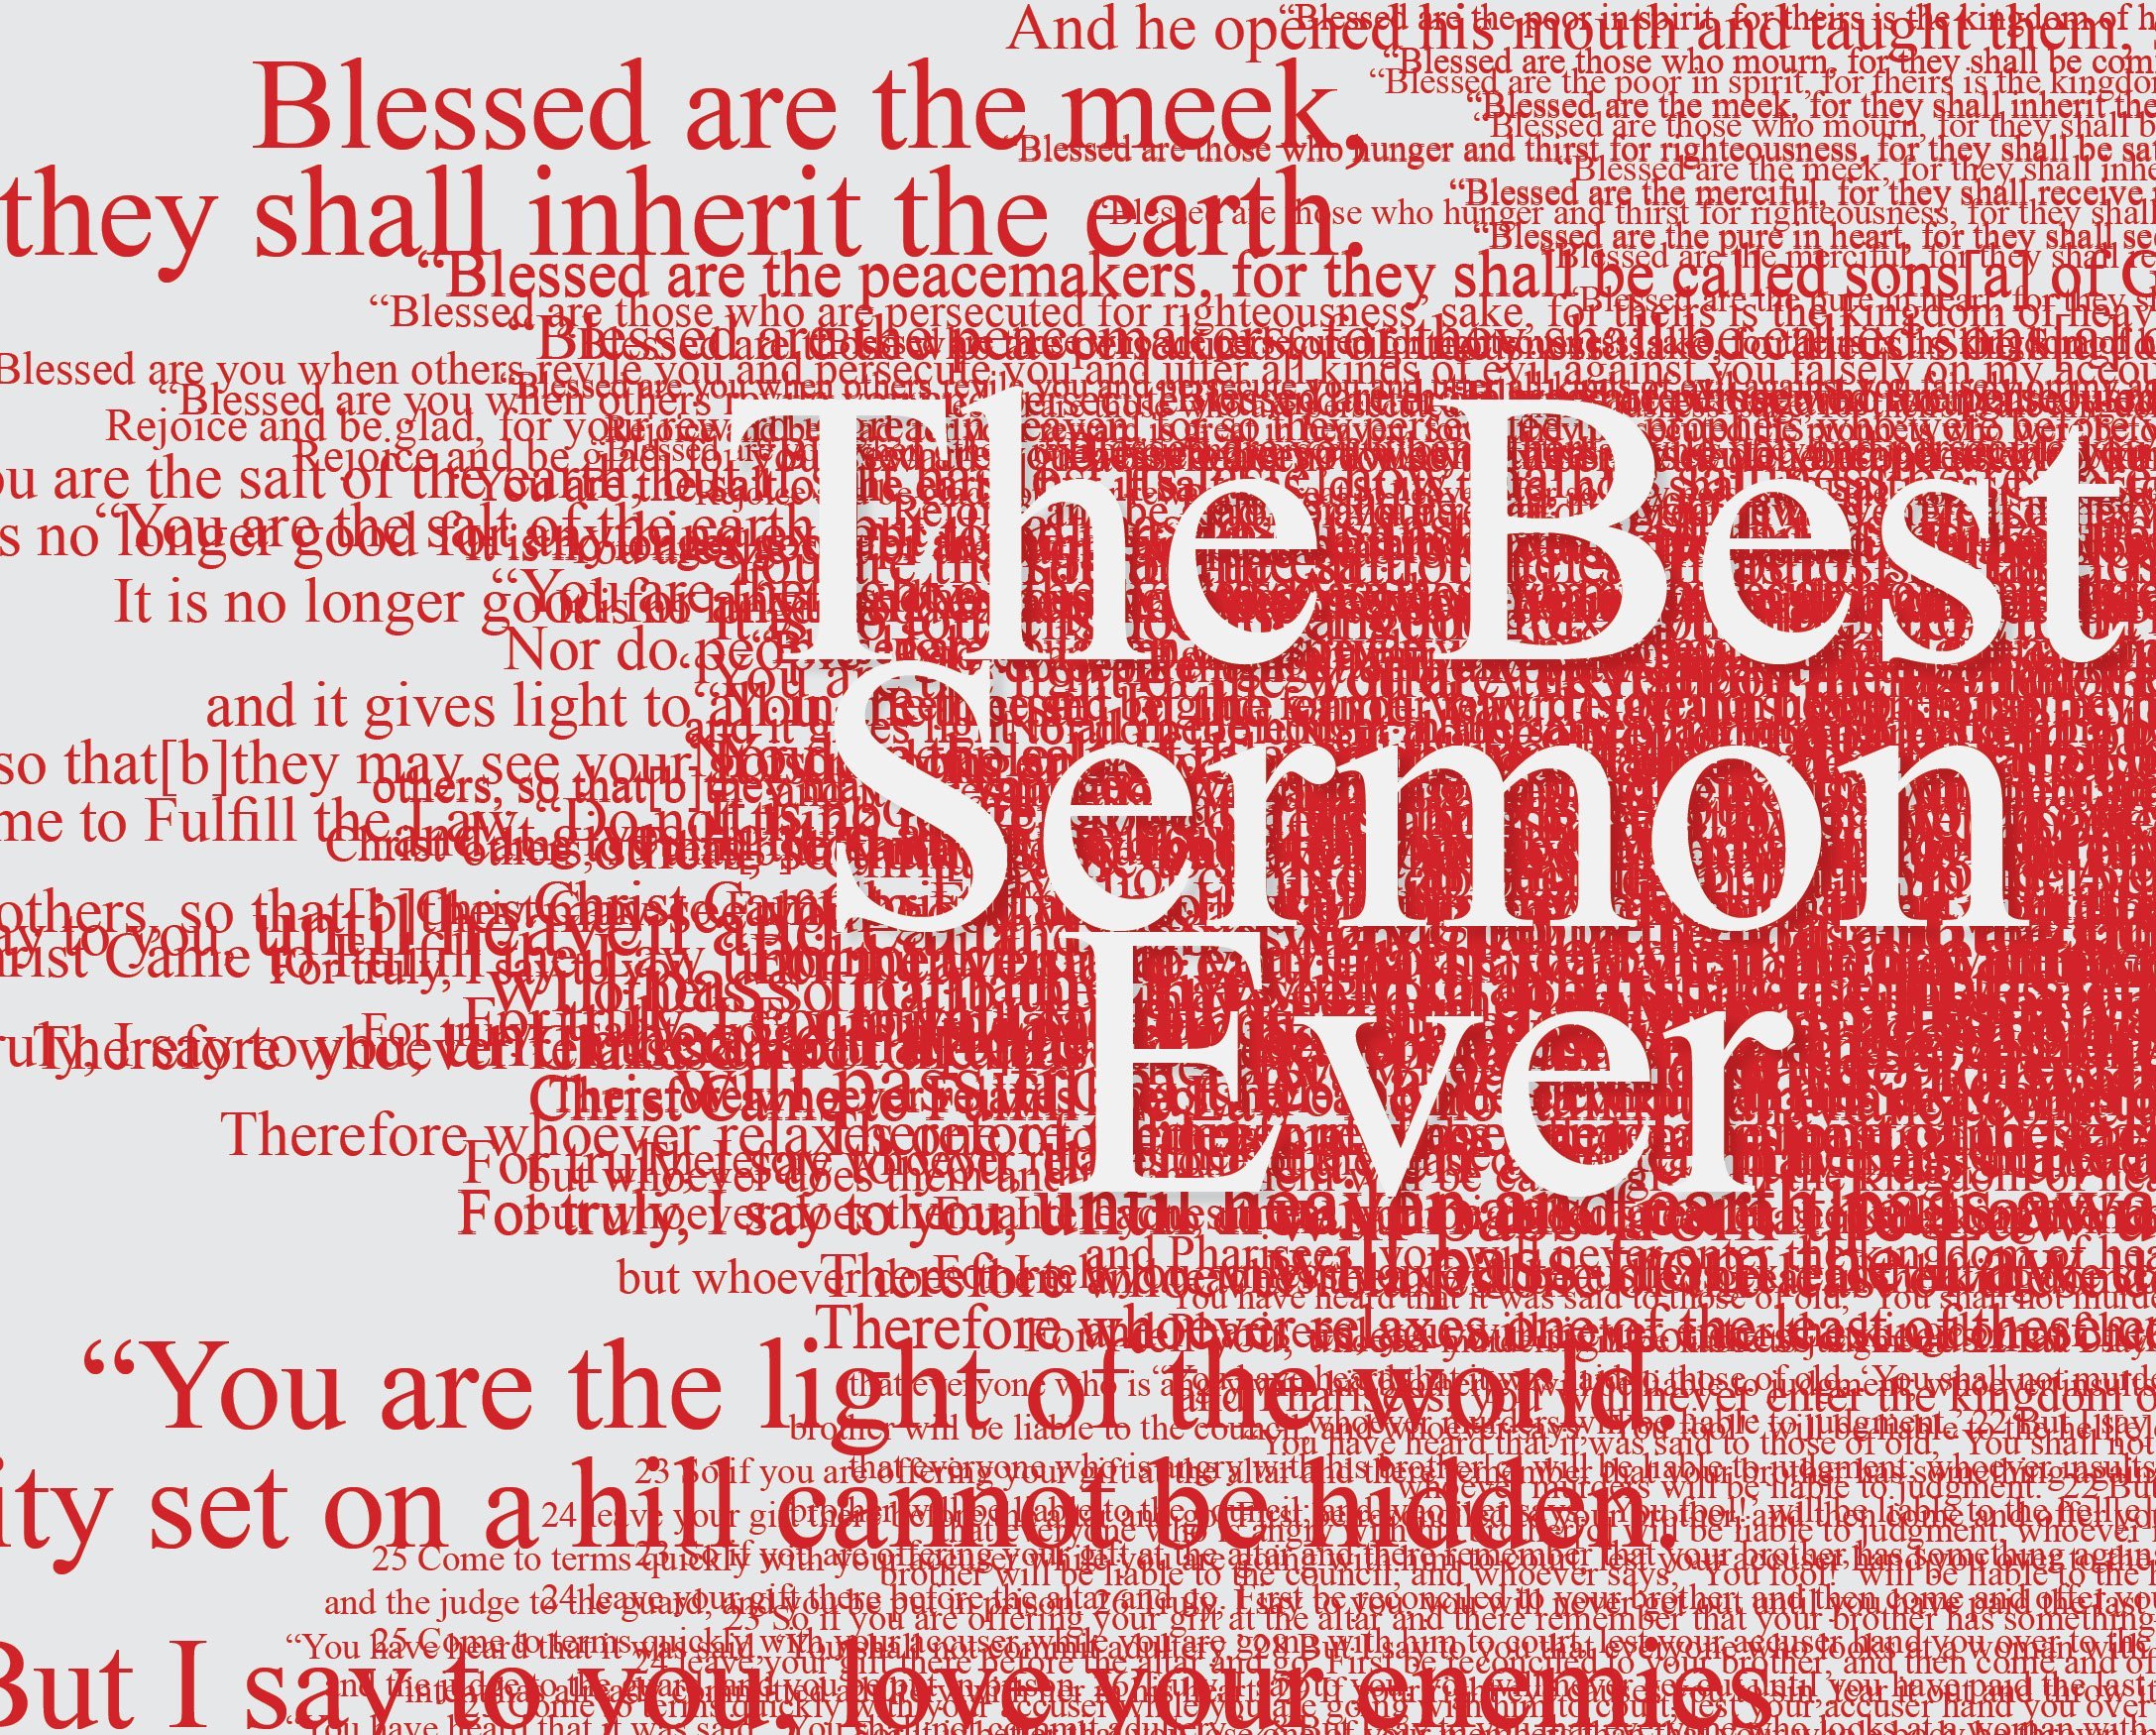 The Best Sermon Ever: The Golden Rule